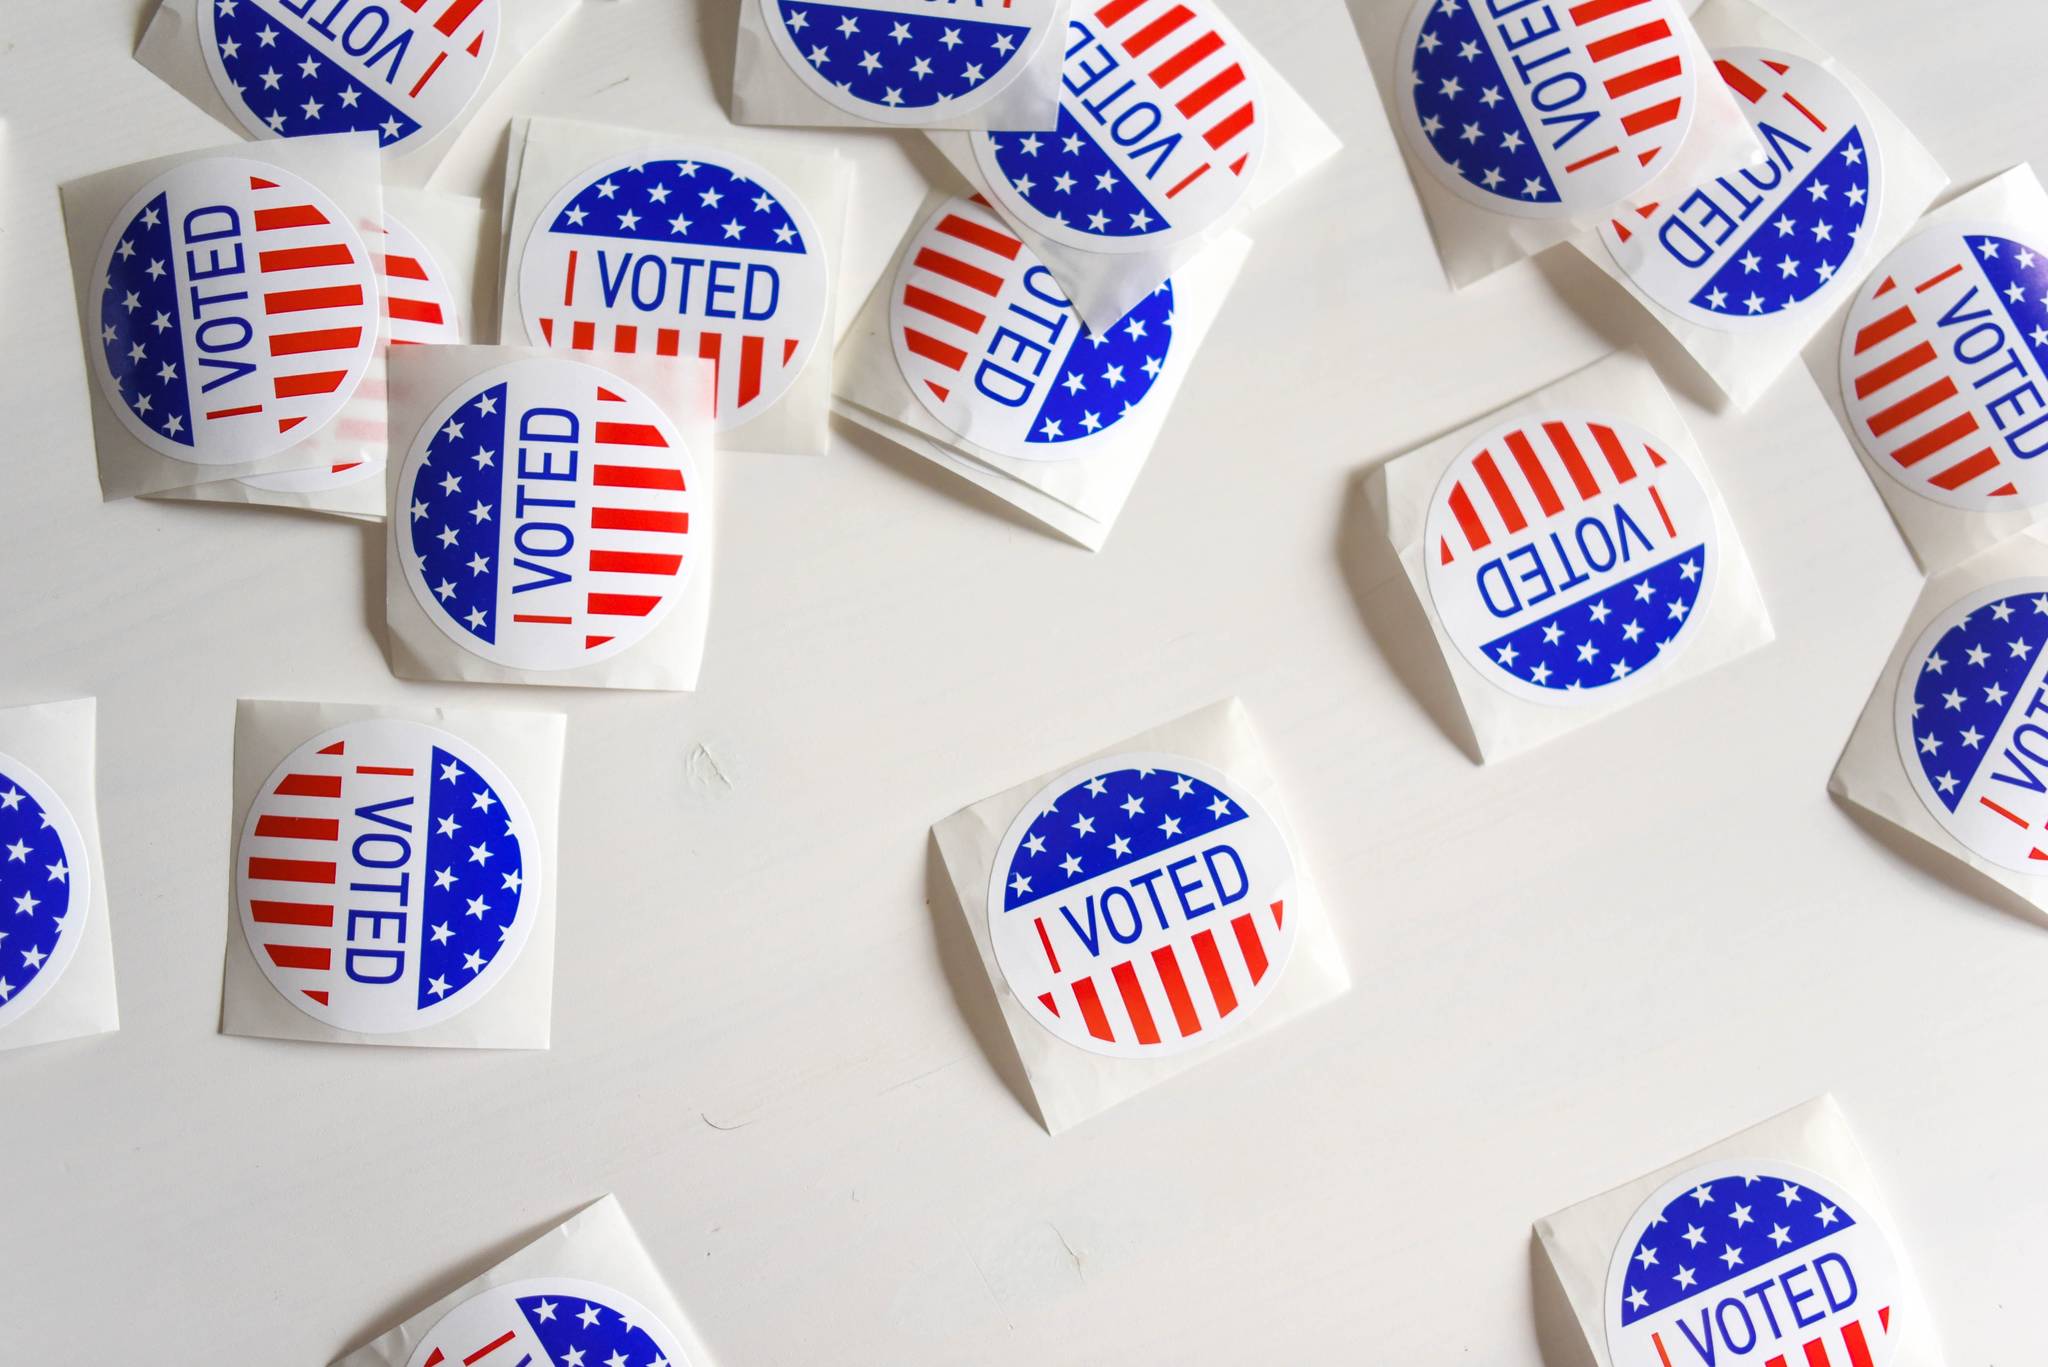 Opinion: People turning 18 on or before Election Day should register to vote